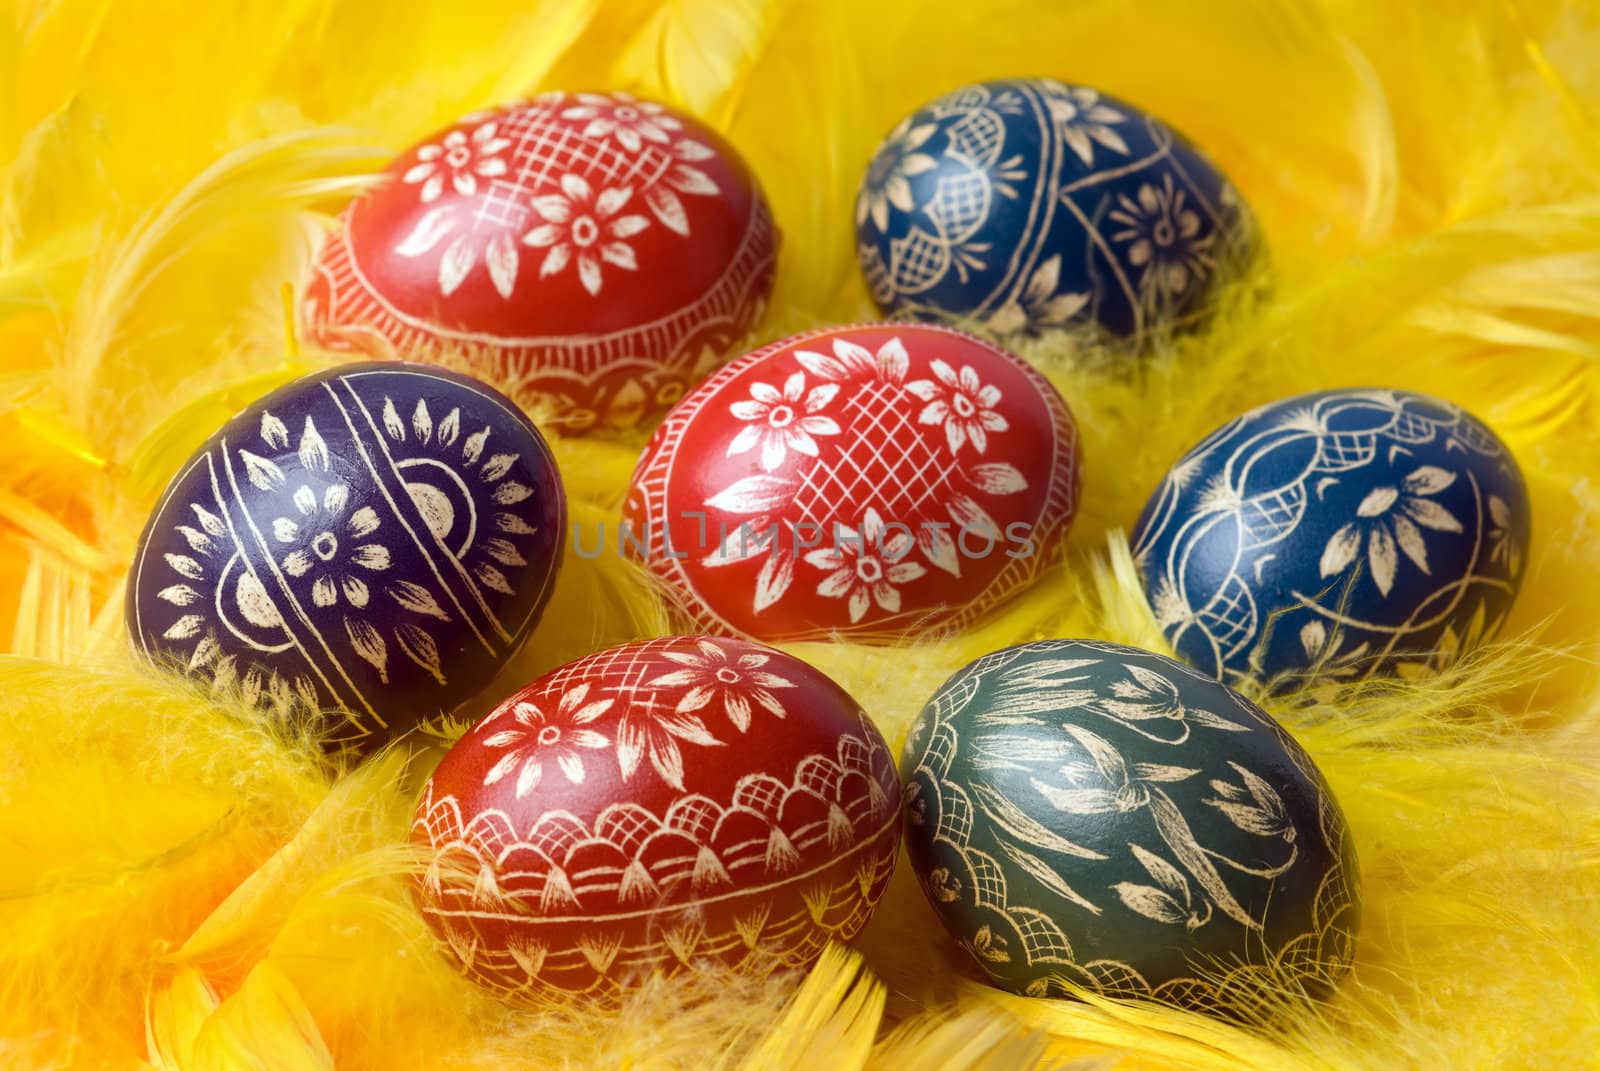 Handmade easter eggs on yellow feathers. Selective focus, shallow depth of field.